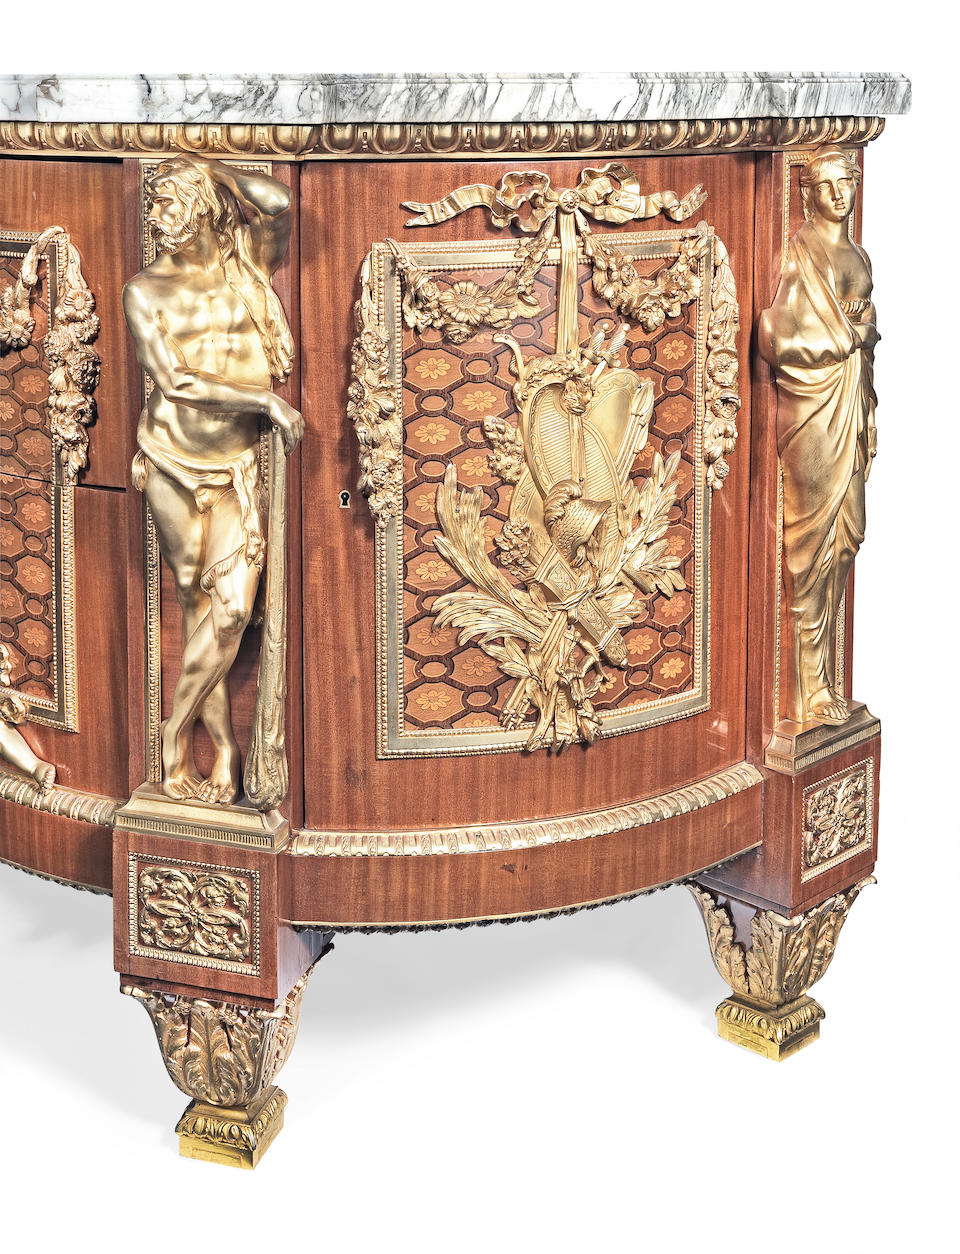 A fine French early 20th century mahogany, fruitwood marquetry and gilt bronze mounted commode in the Louis XVI style, after the original by Jean-Henri Reisener